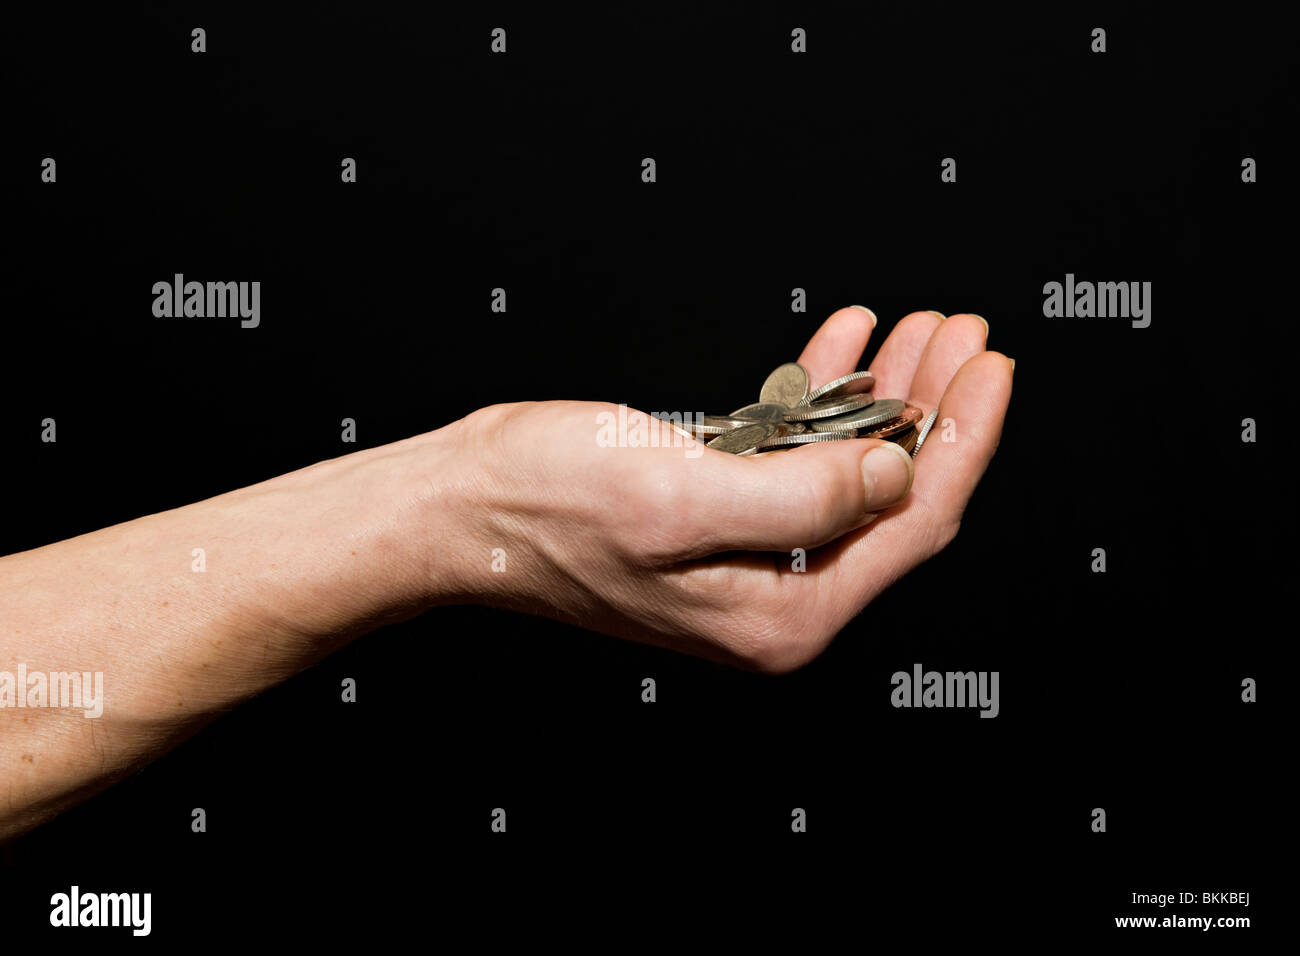 Caucasian male (42 yrs old) with hand held out full of money against a black background Stock Photo